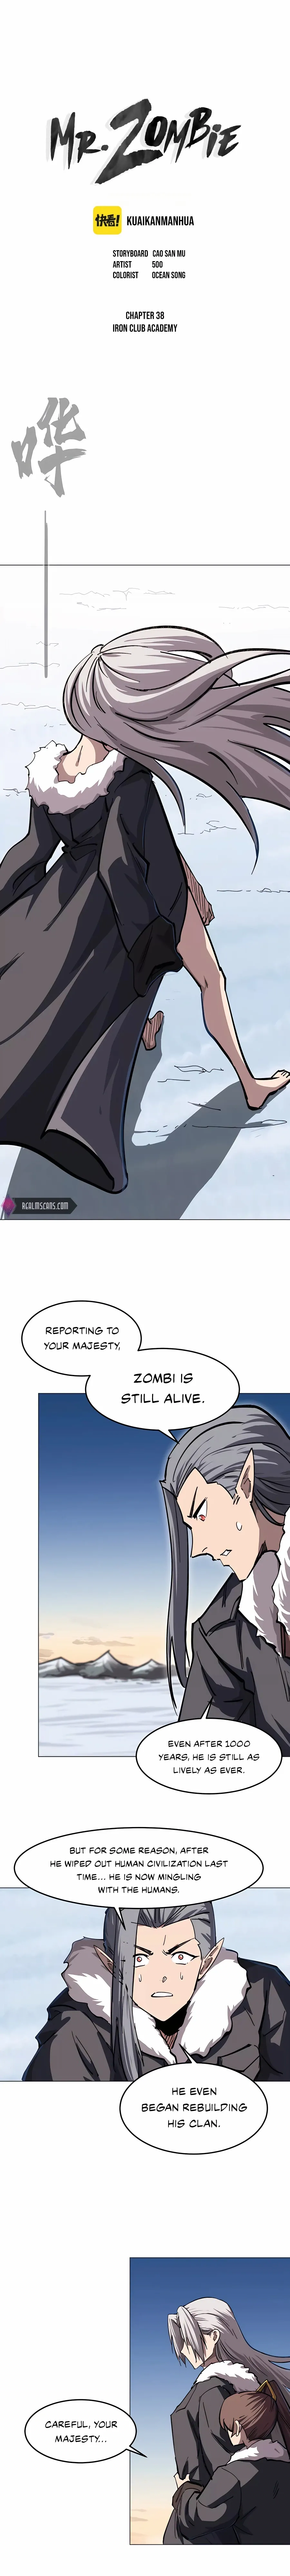 Mr. Zombie - Page 2